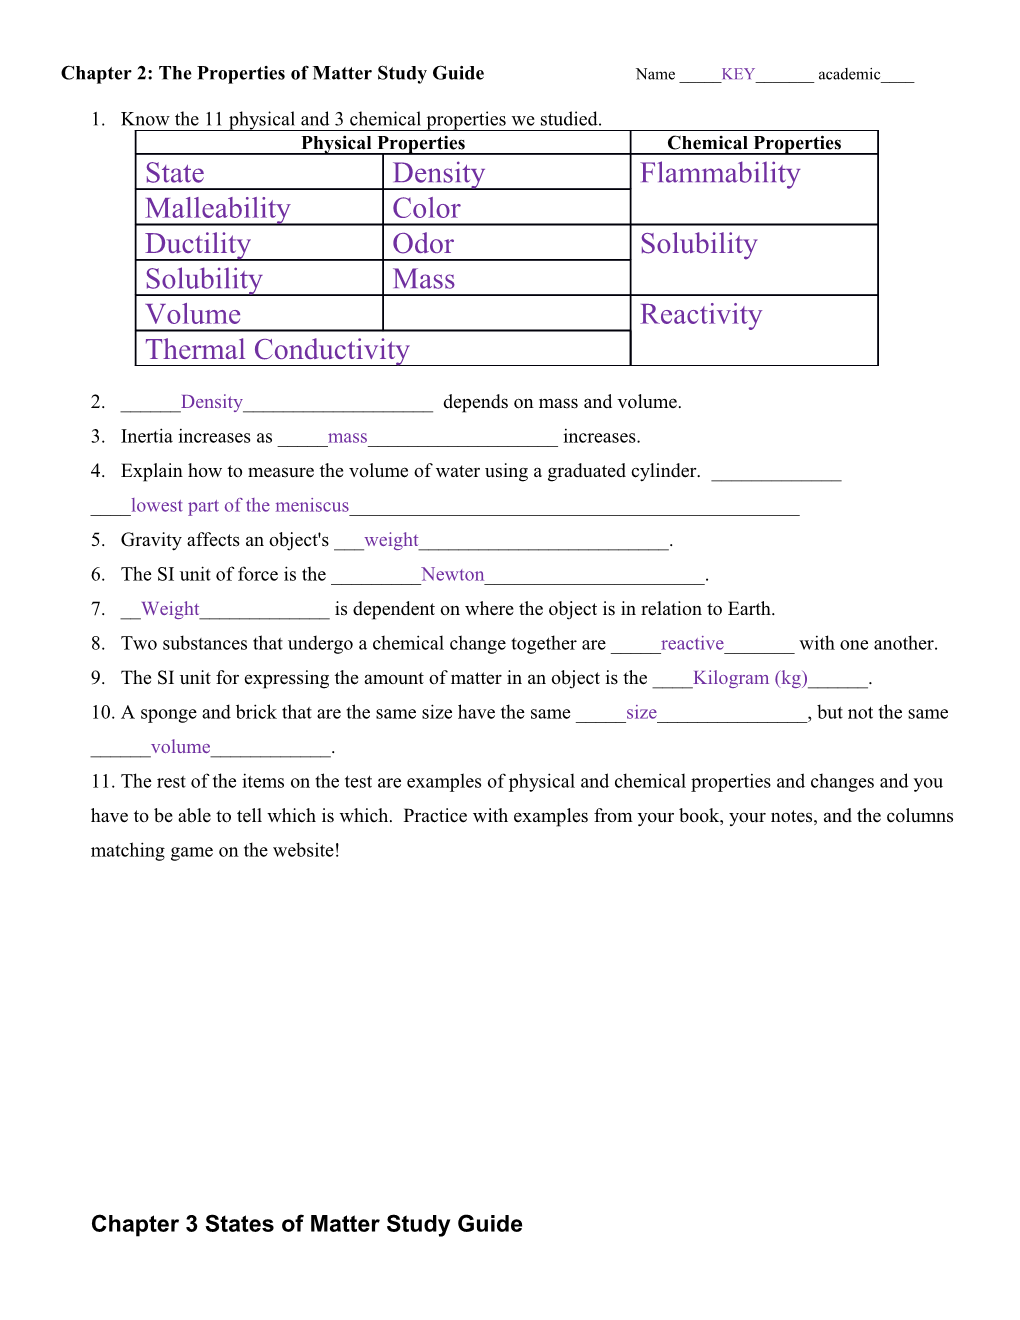 Chapter 2: the Properties of Matter Study Guide